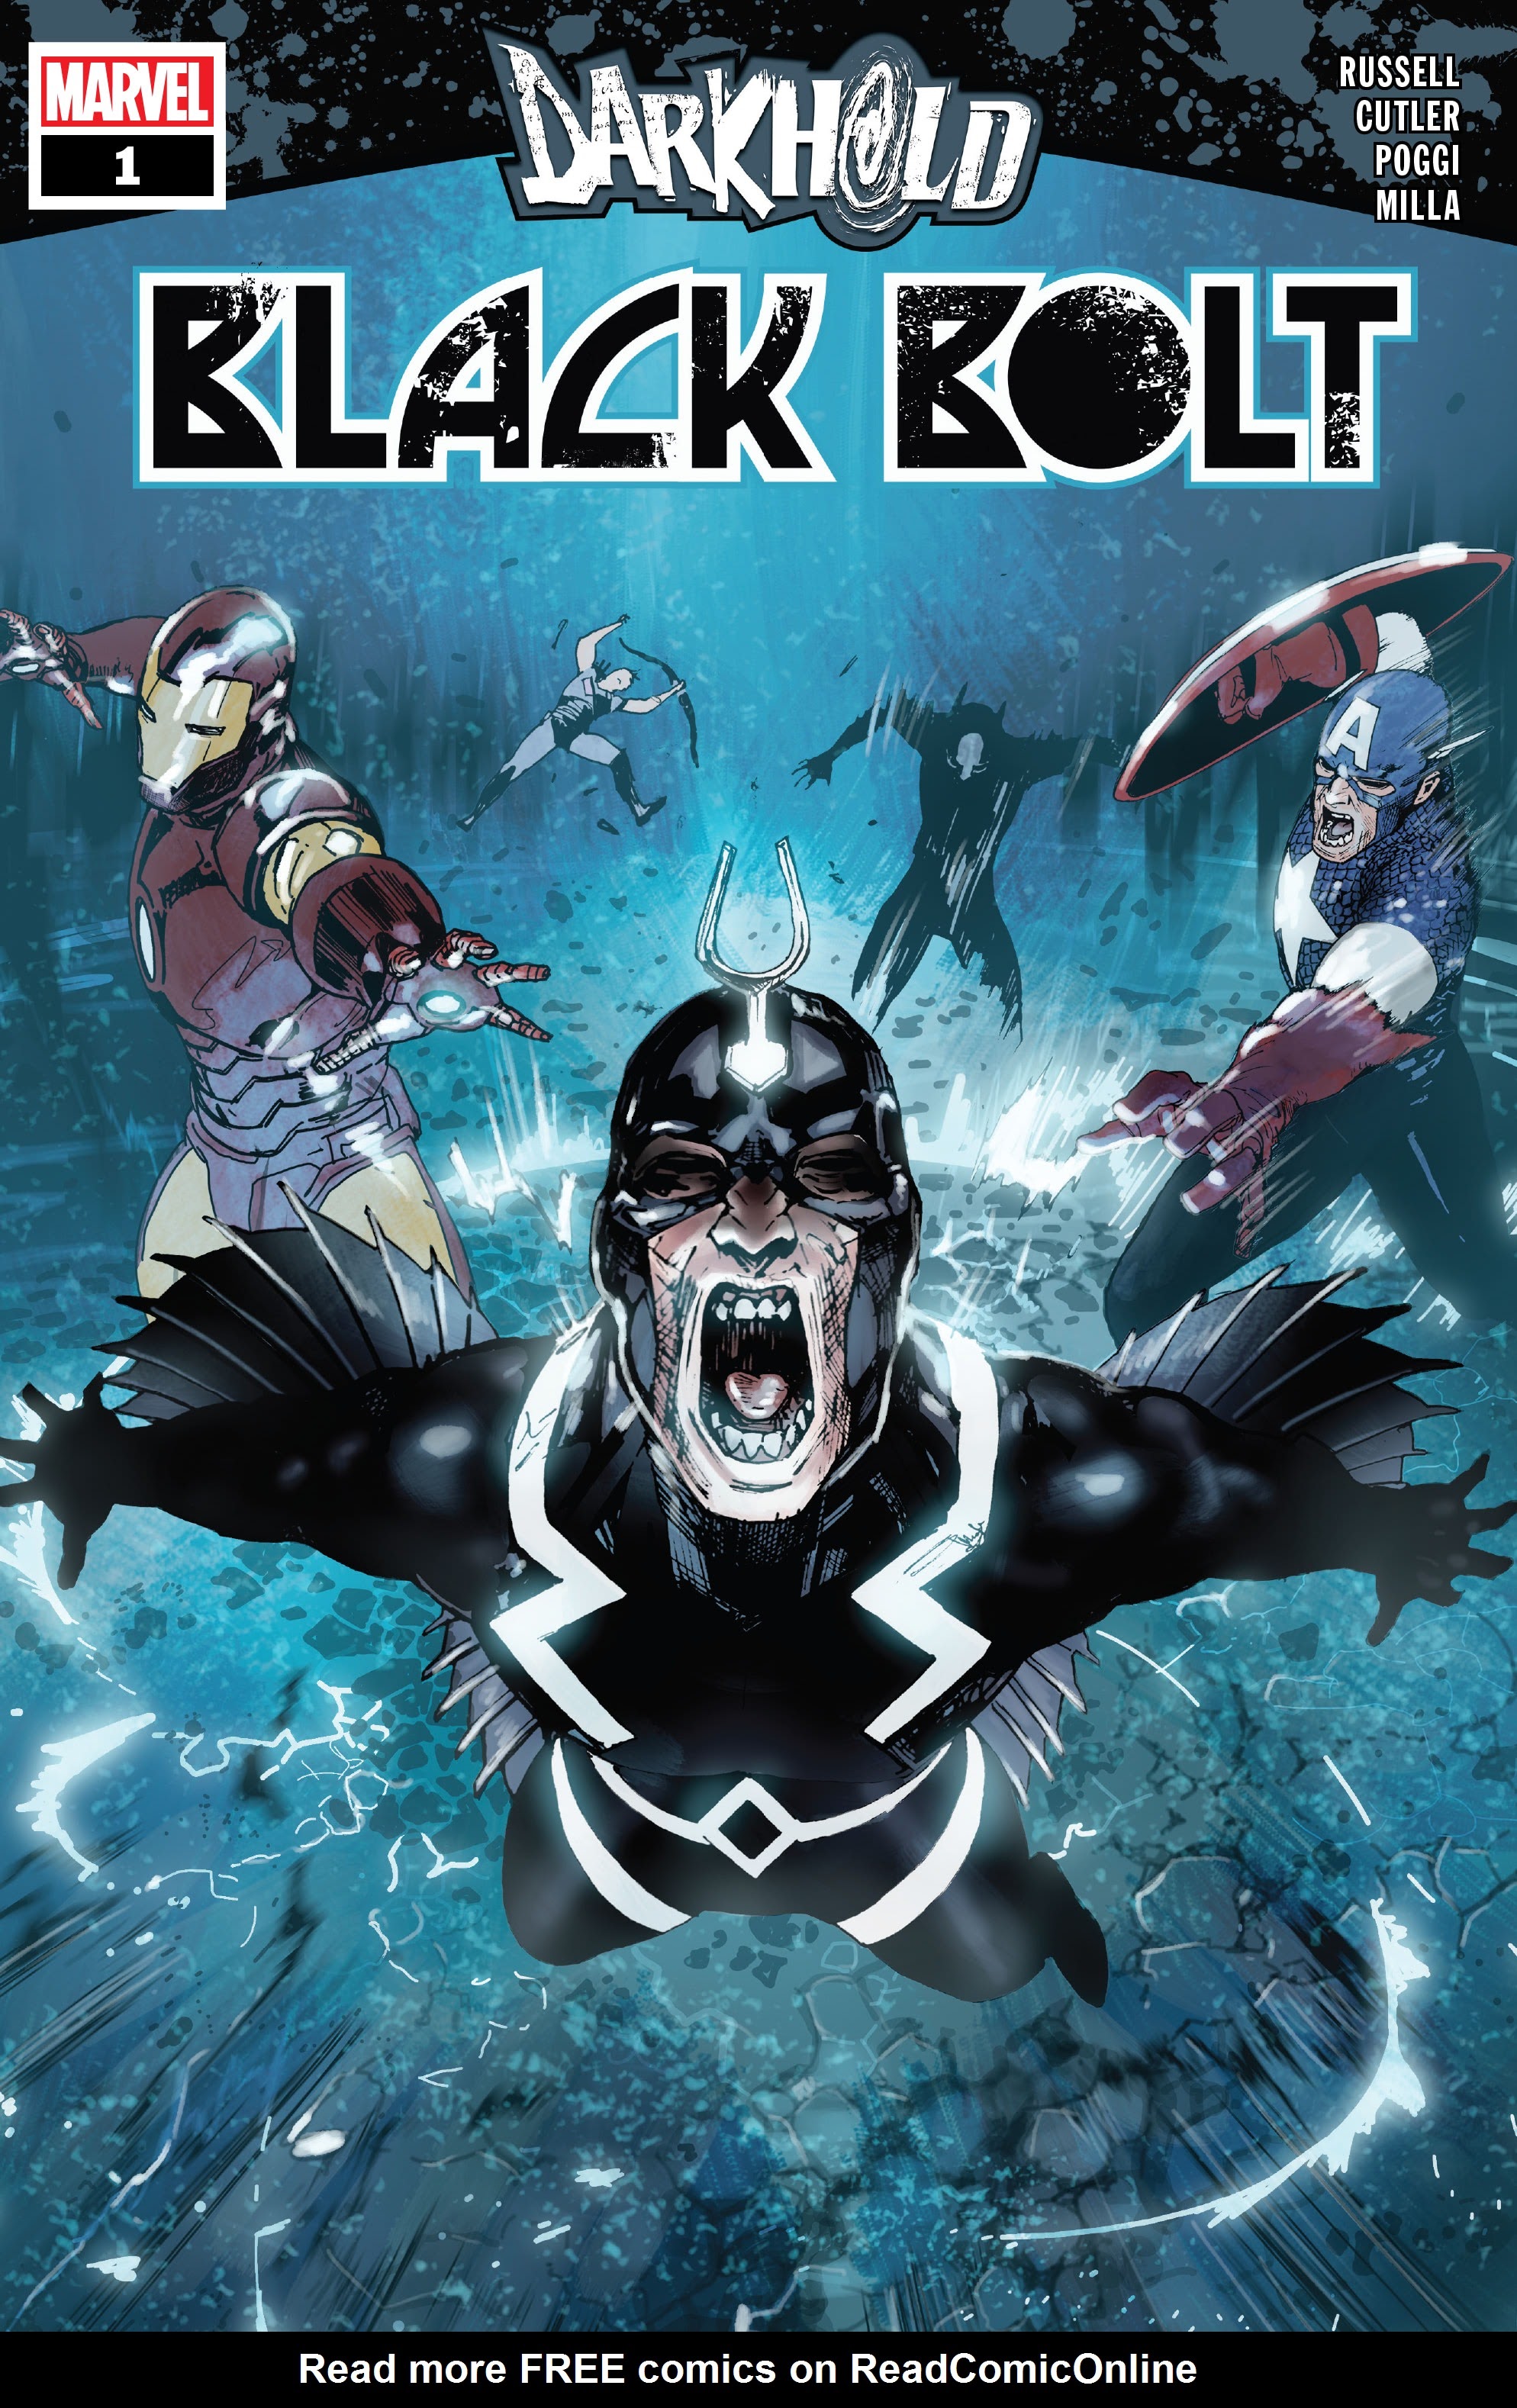 Read online The Darkhold comic -  Issue # Black Bolt - 1